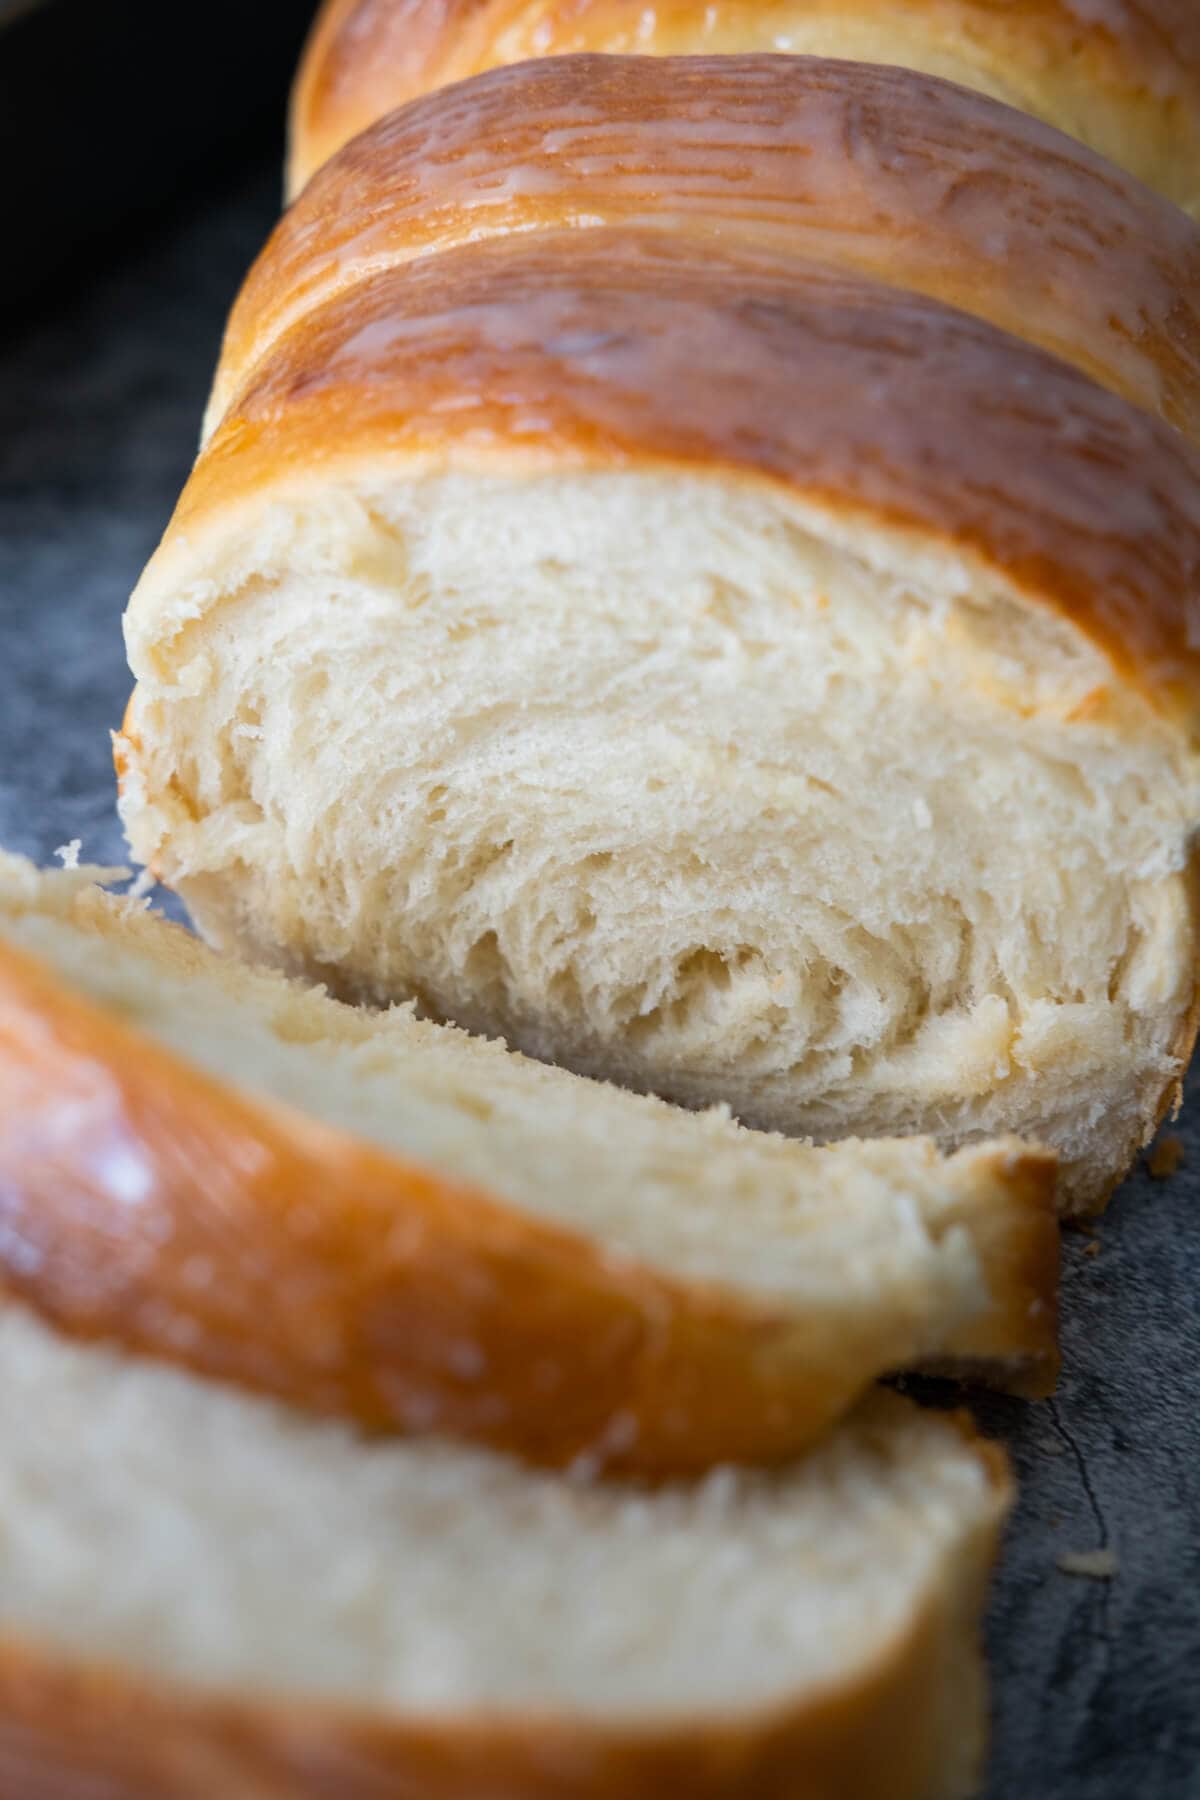 Milky bread with white soft fluffy inside.  